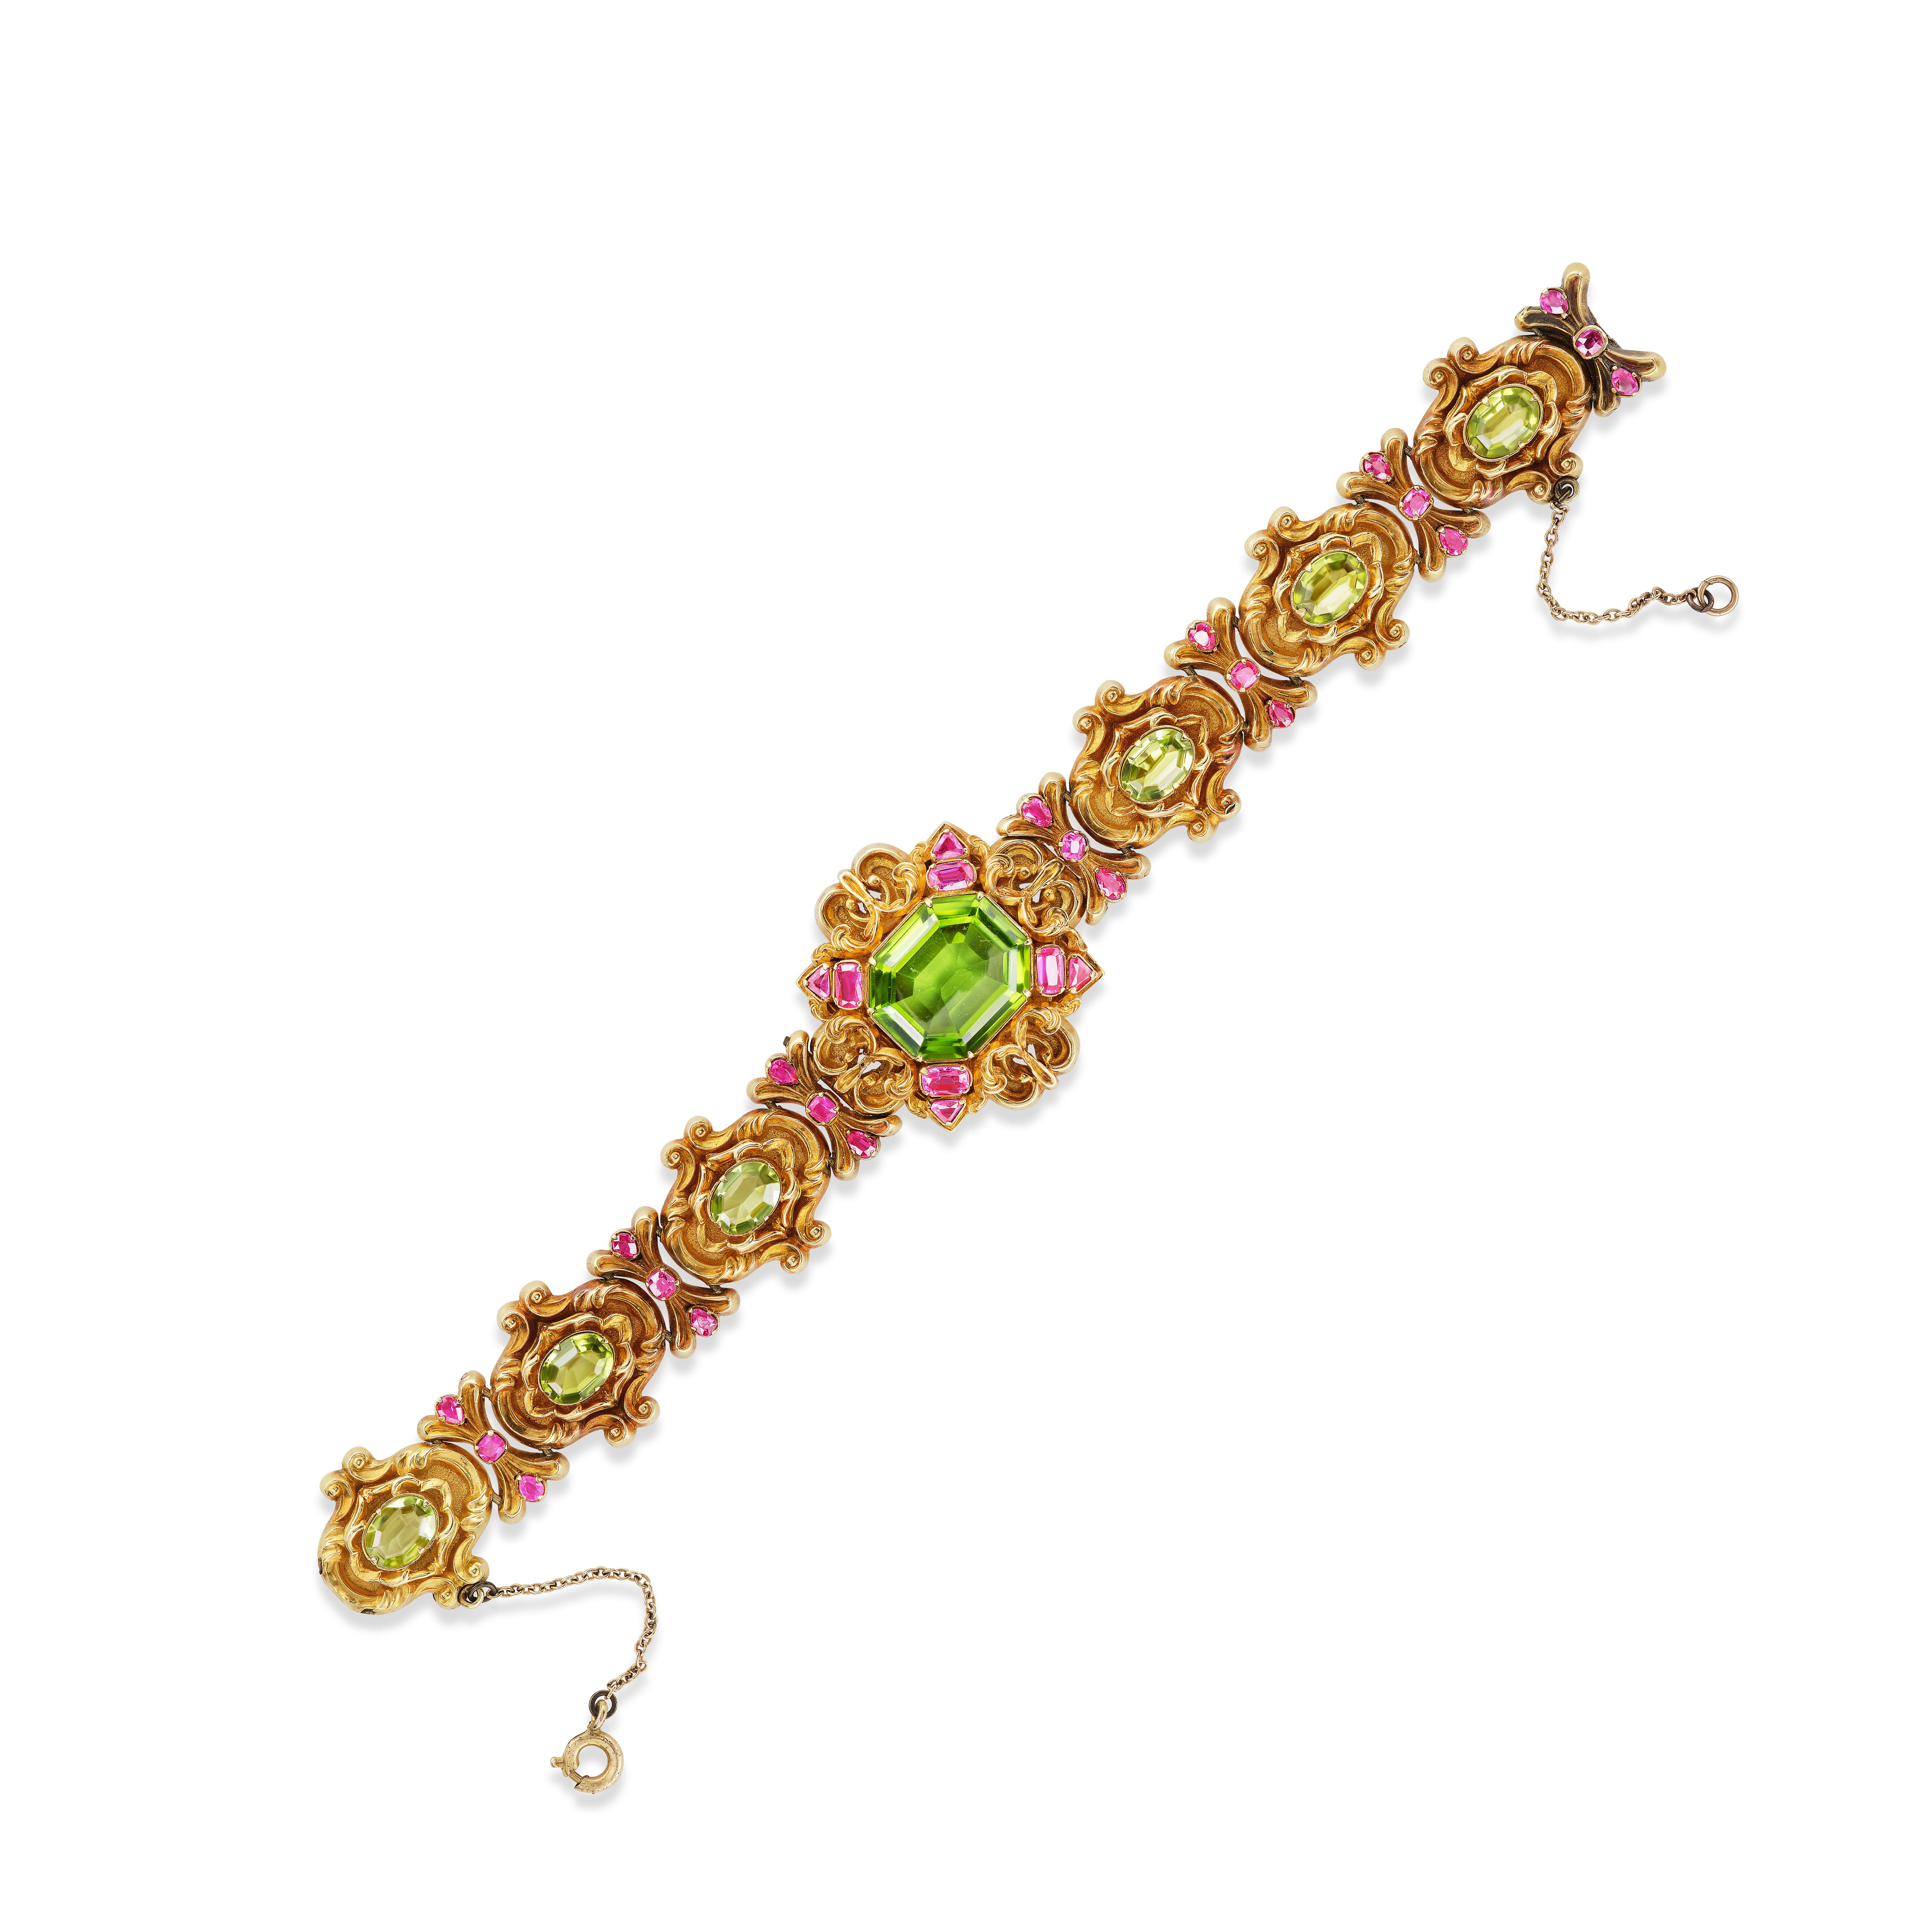 A large octagonal step-cut peridont weighing approximately 8.50 carats sits in an intricate gold Georgian-style bracelet accentuated by 6 oval-cut peridots of approximately 1.50 carats each and cushion and oval rubies. 